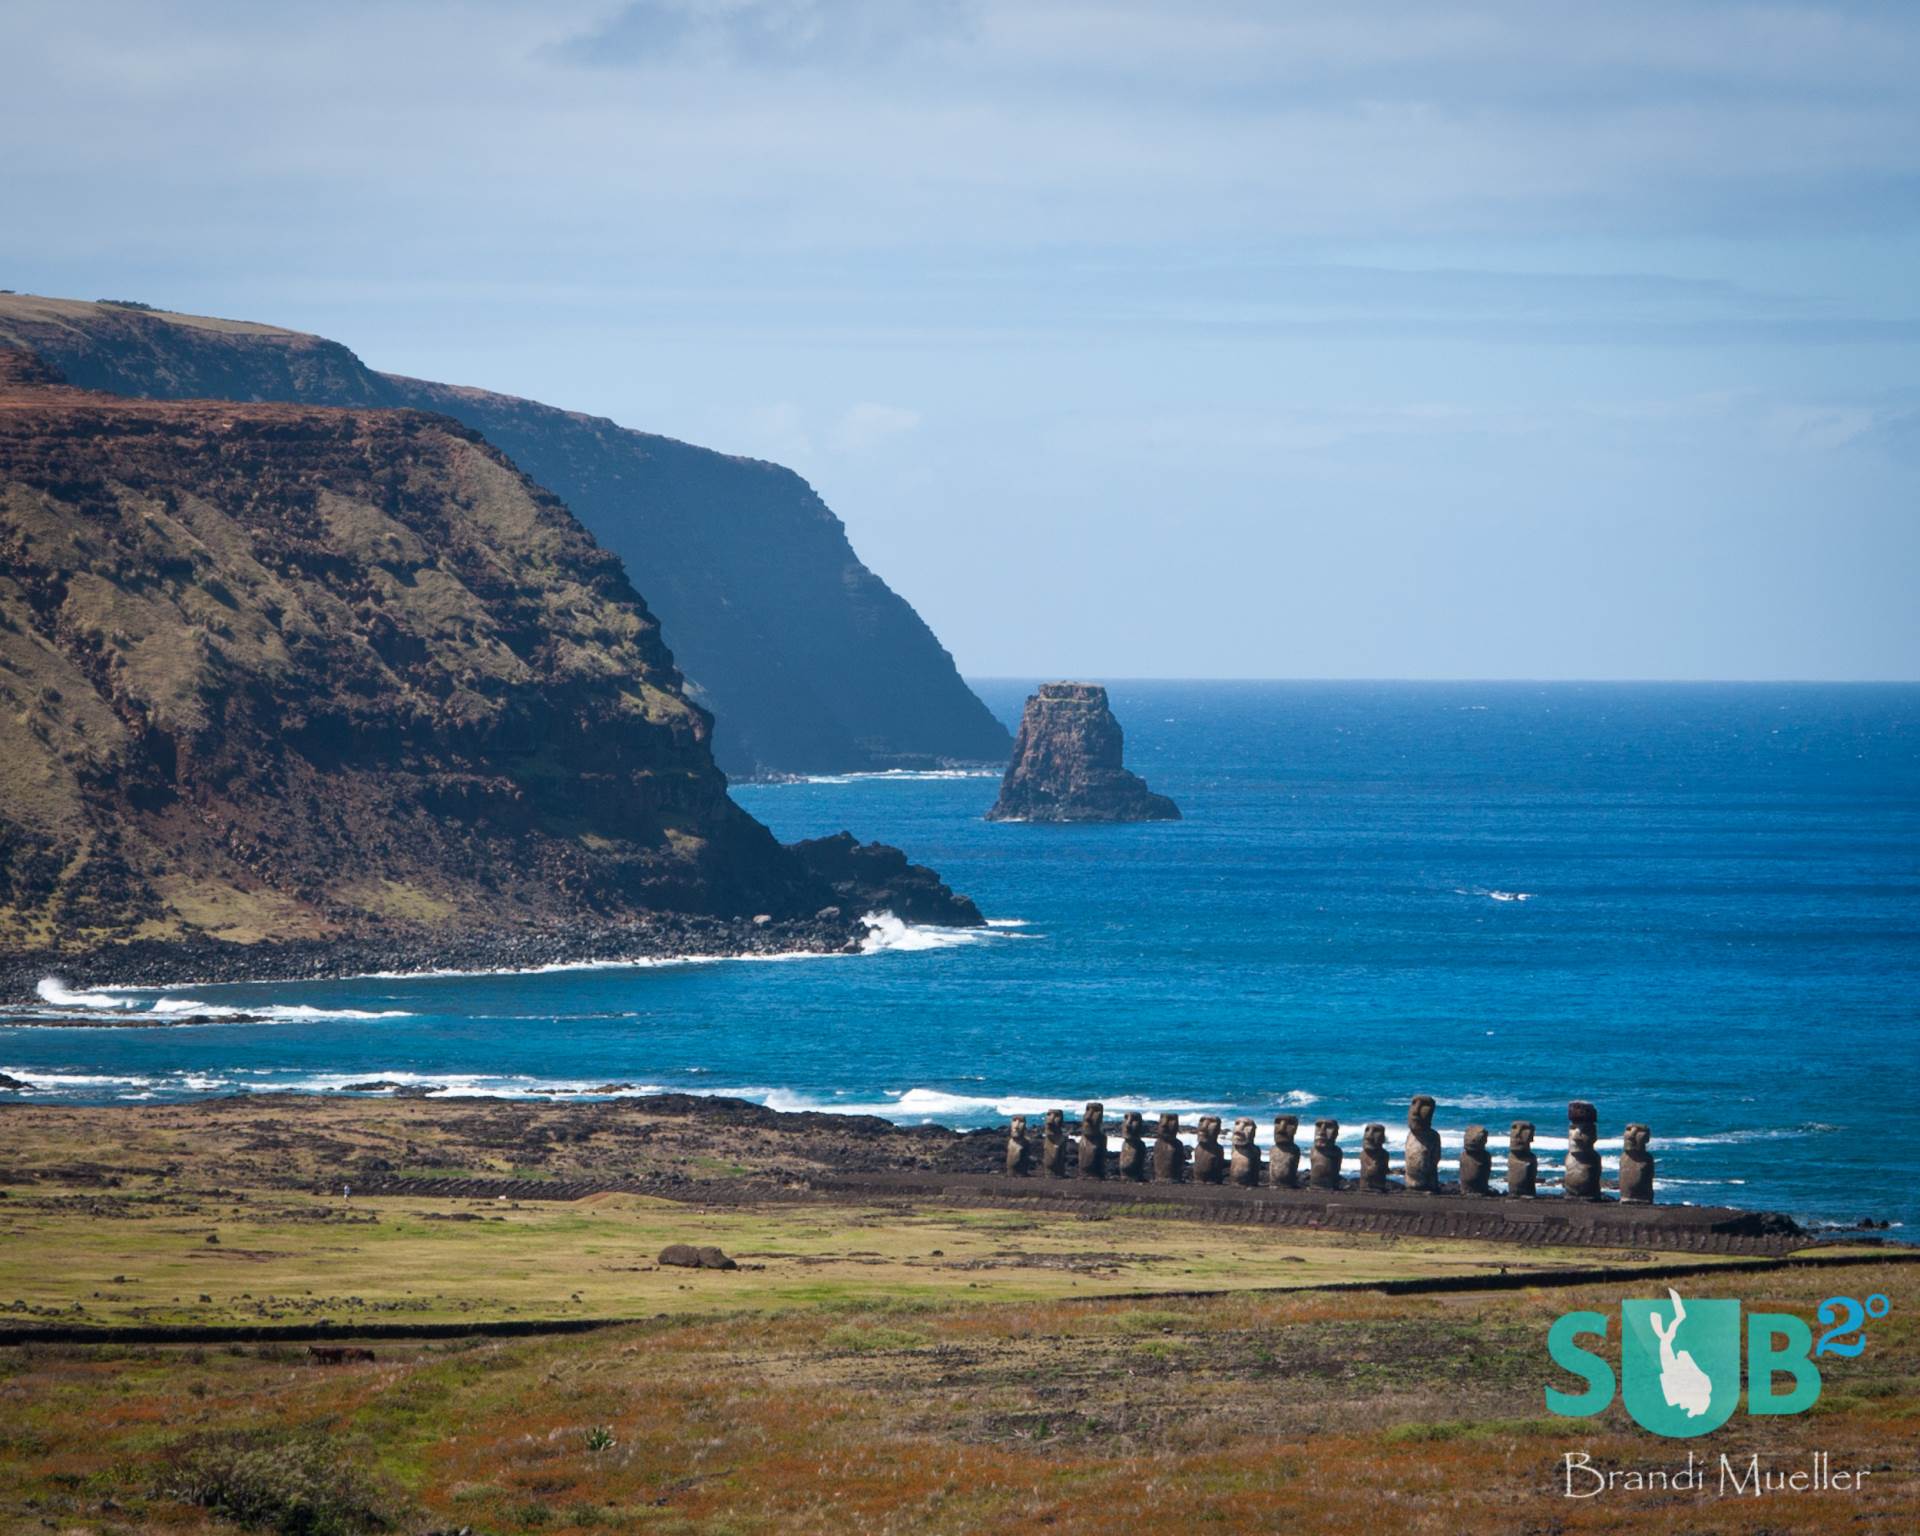 The fifteen moai of Ahu Tongoriki have been restored on the coastline of Easter Island.